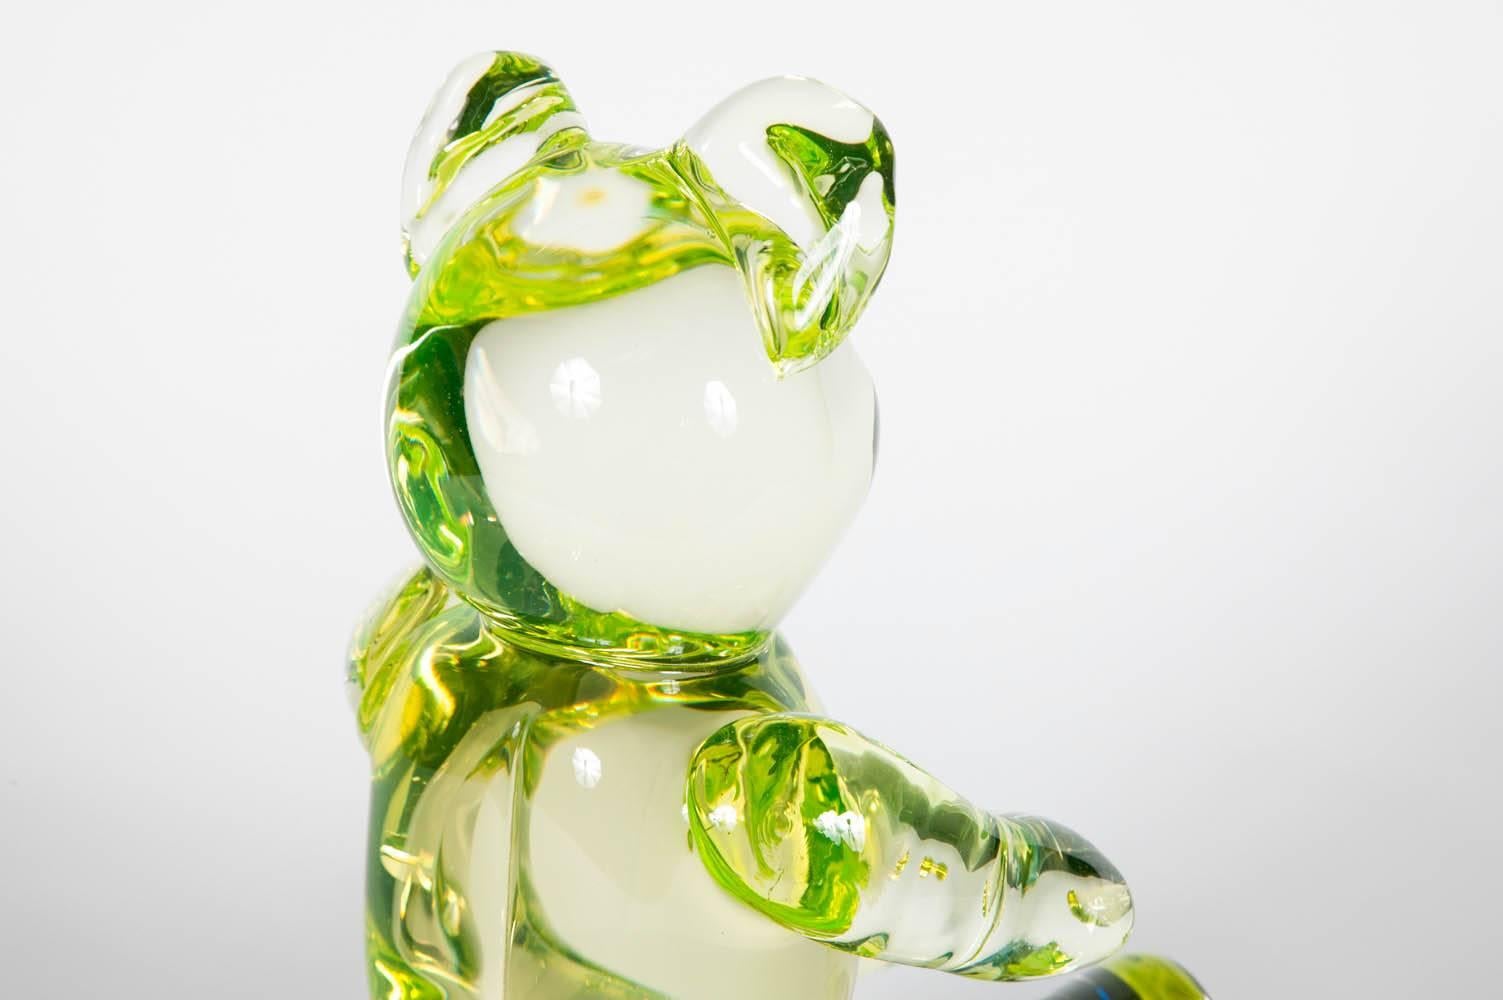 British Bear, a unique lime green glass sculpted animal figurine by Elliot Walker